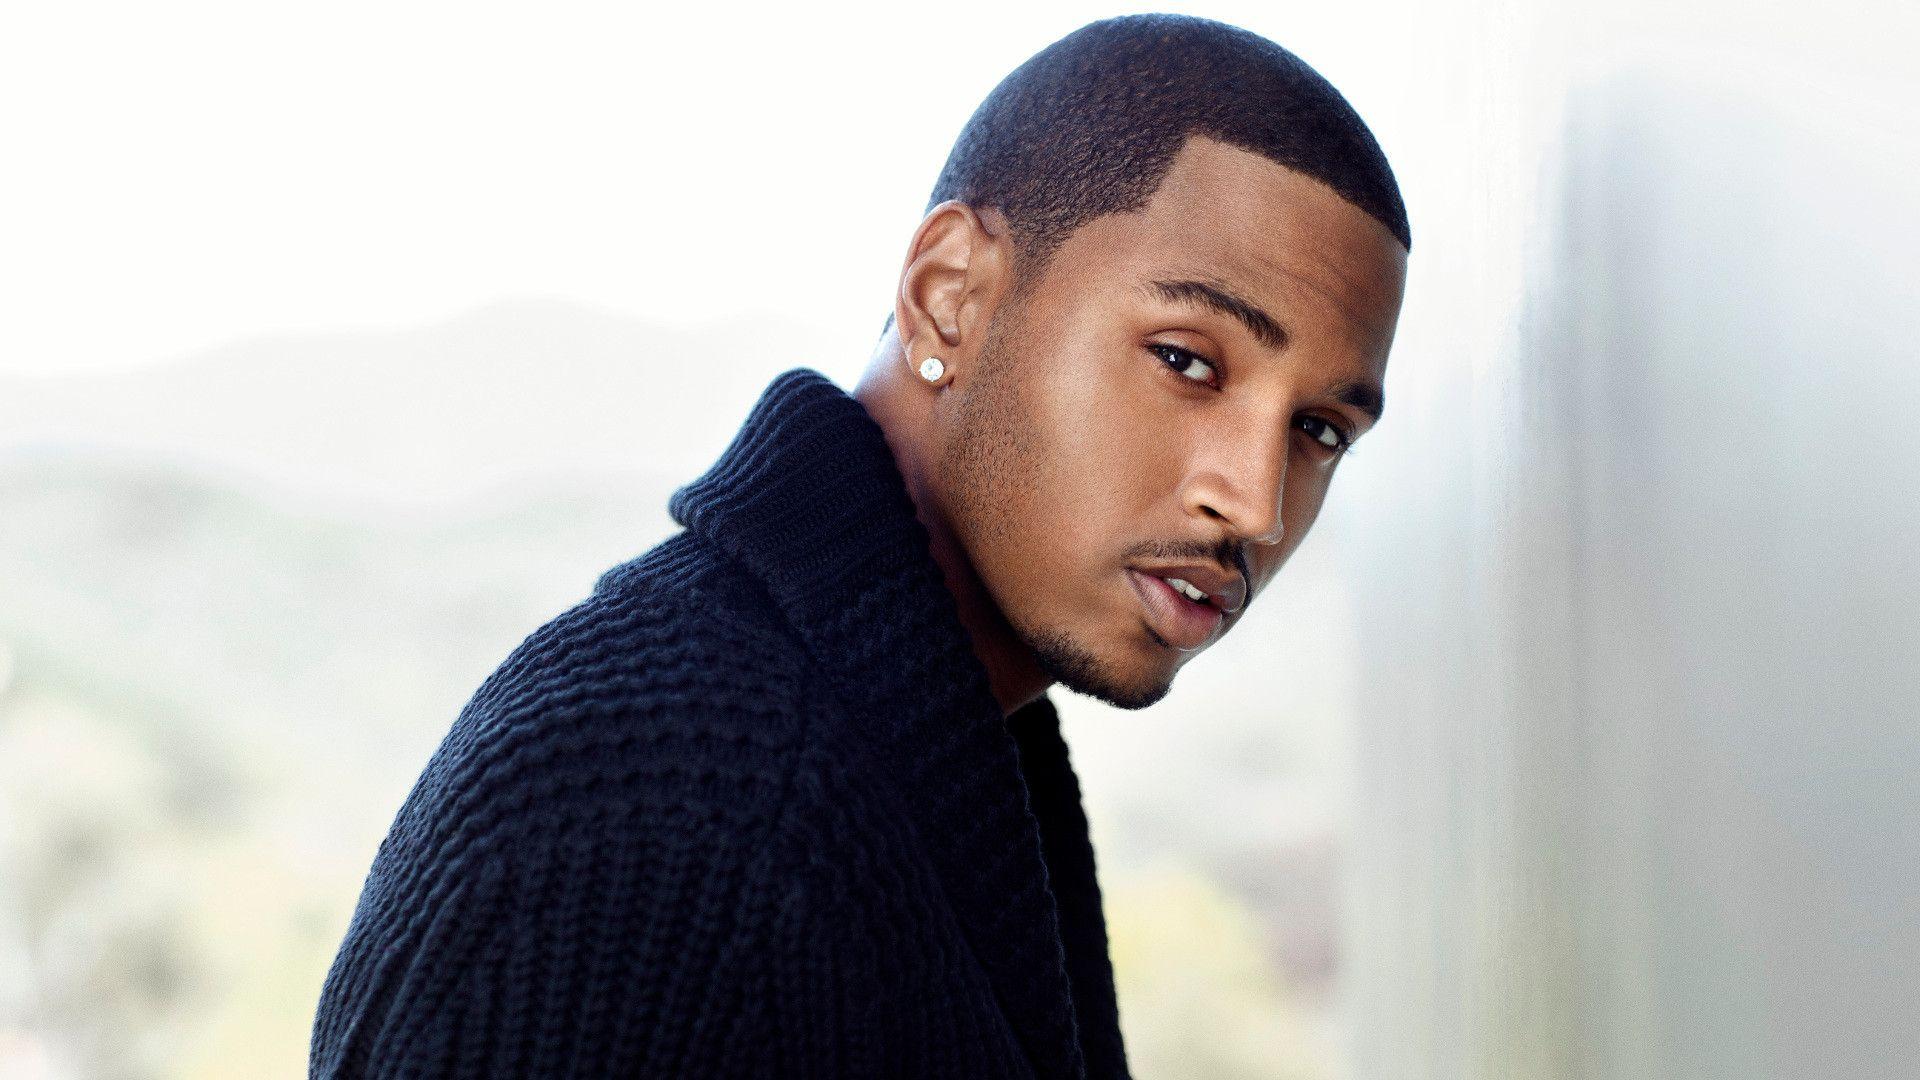 Trey Songz Wallpapers 66 images